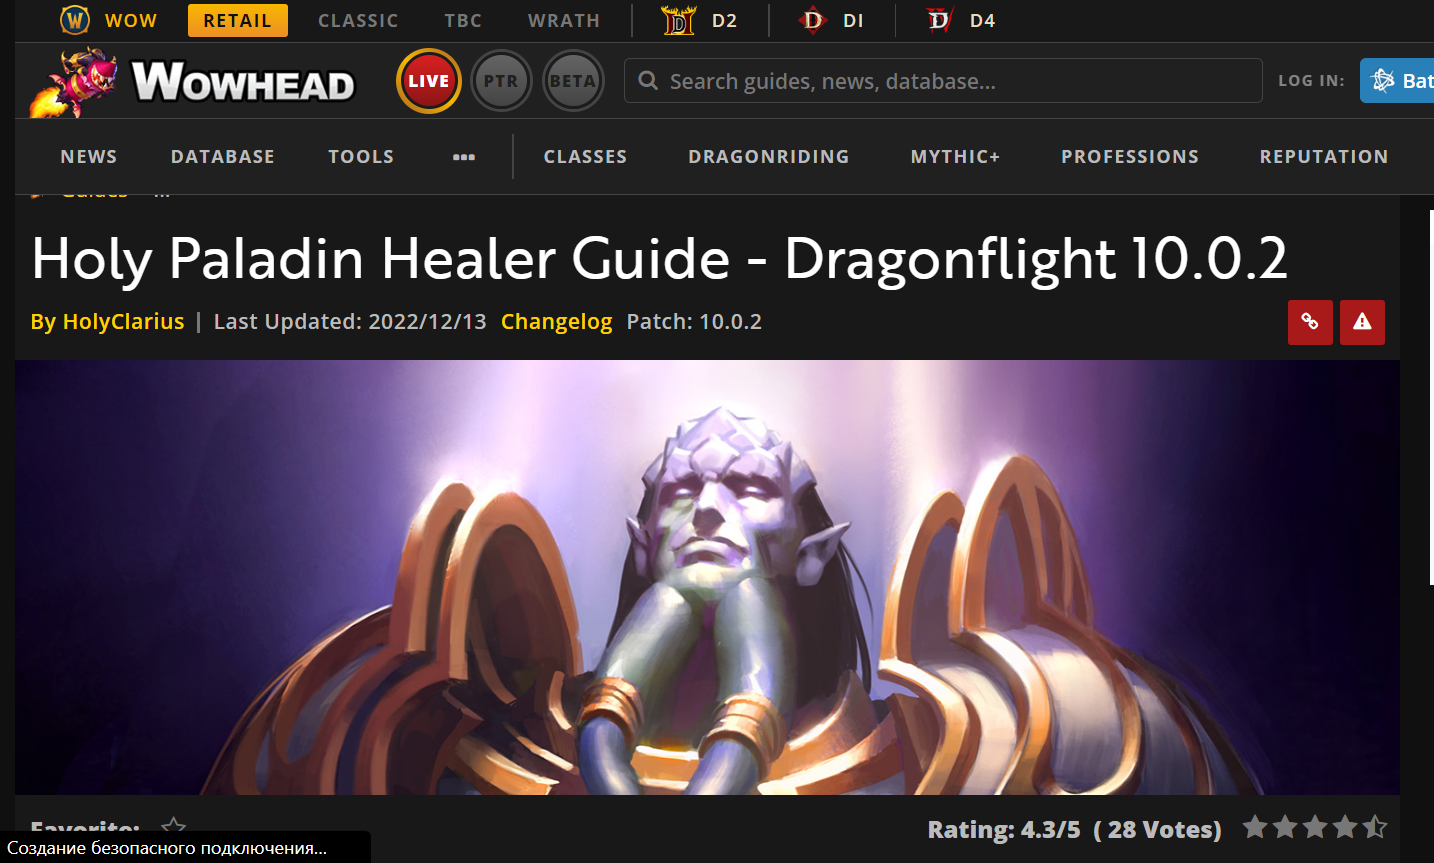 Where a Beginner Can Gain Gaming Experience and Knowledge Regarding World of Warcraft and The Dragonflight Update